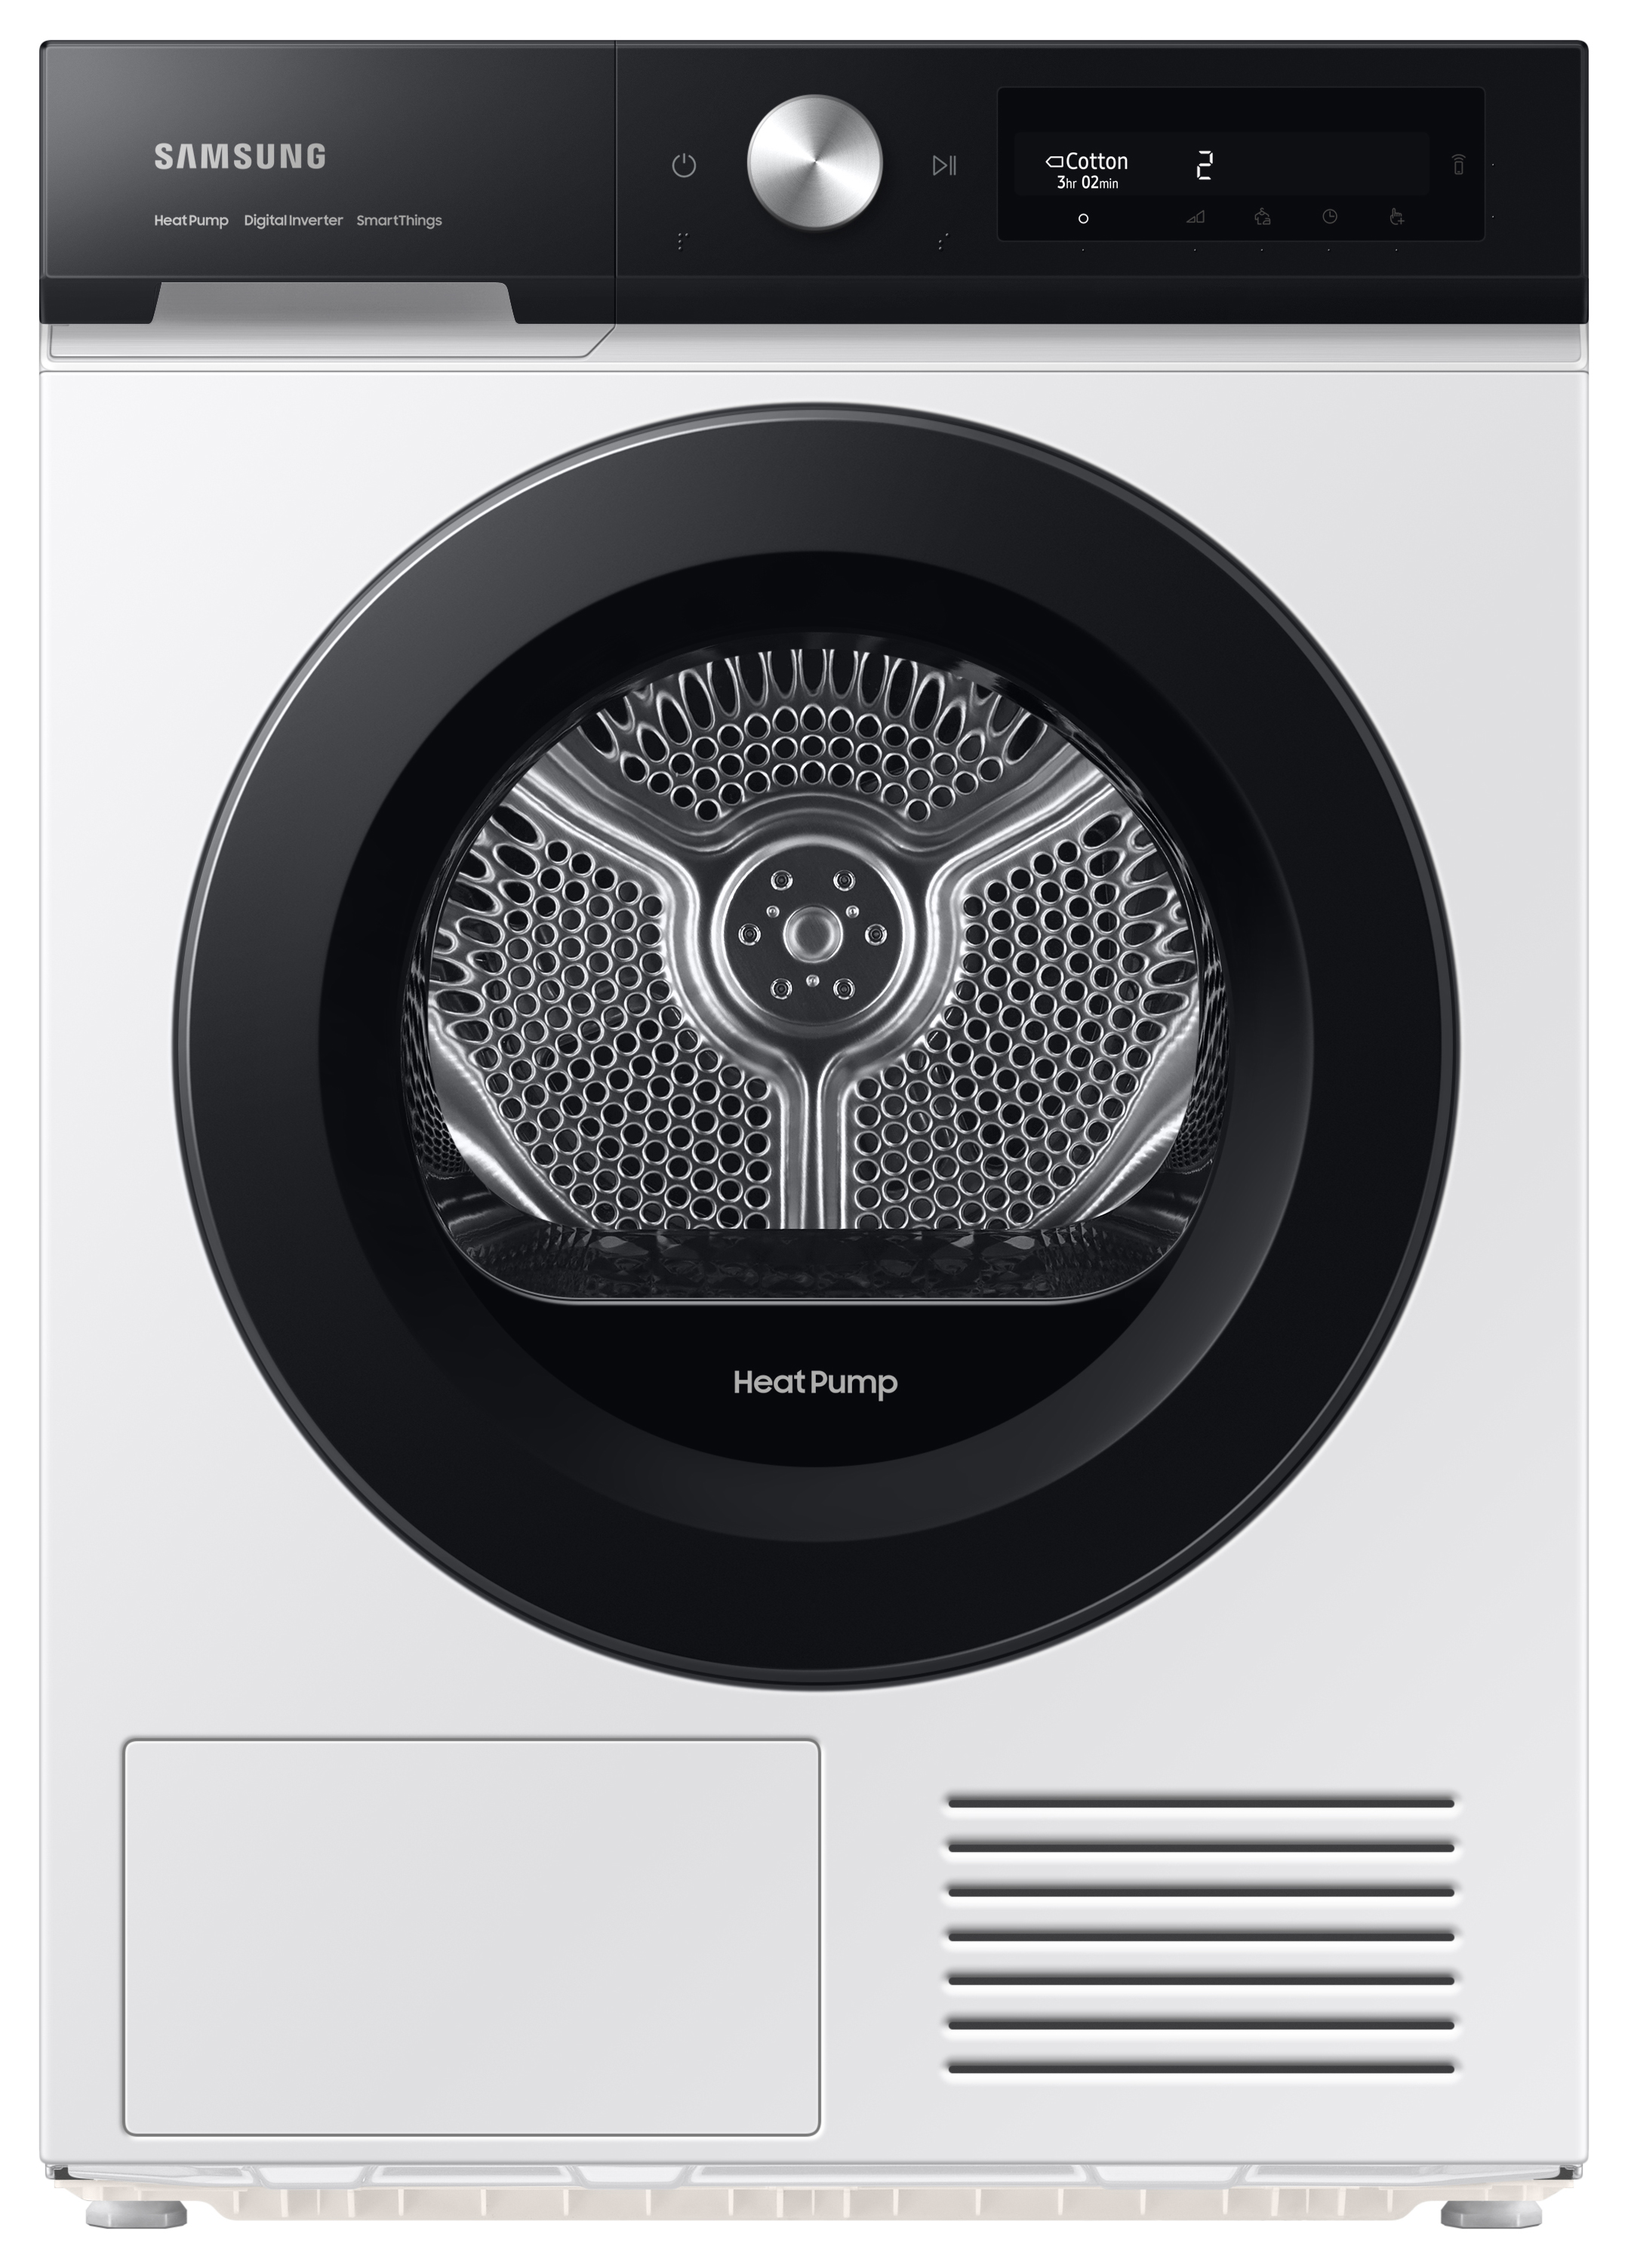 Image of Samsung Series 5+ DV90BB5245AES1 with OptimalDry™ 9kg Tumble Dryer - White